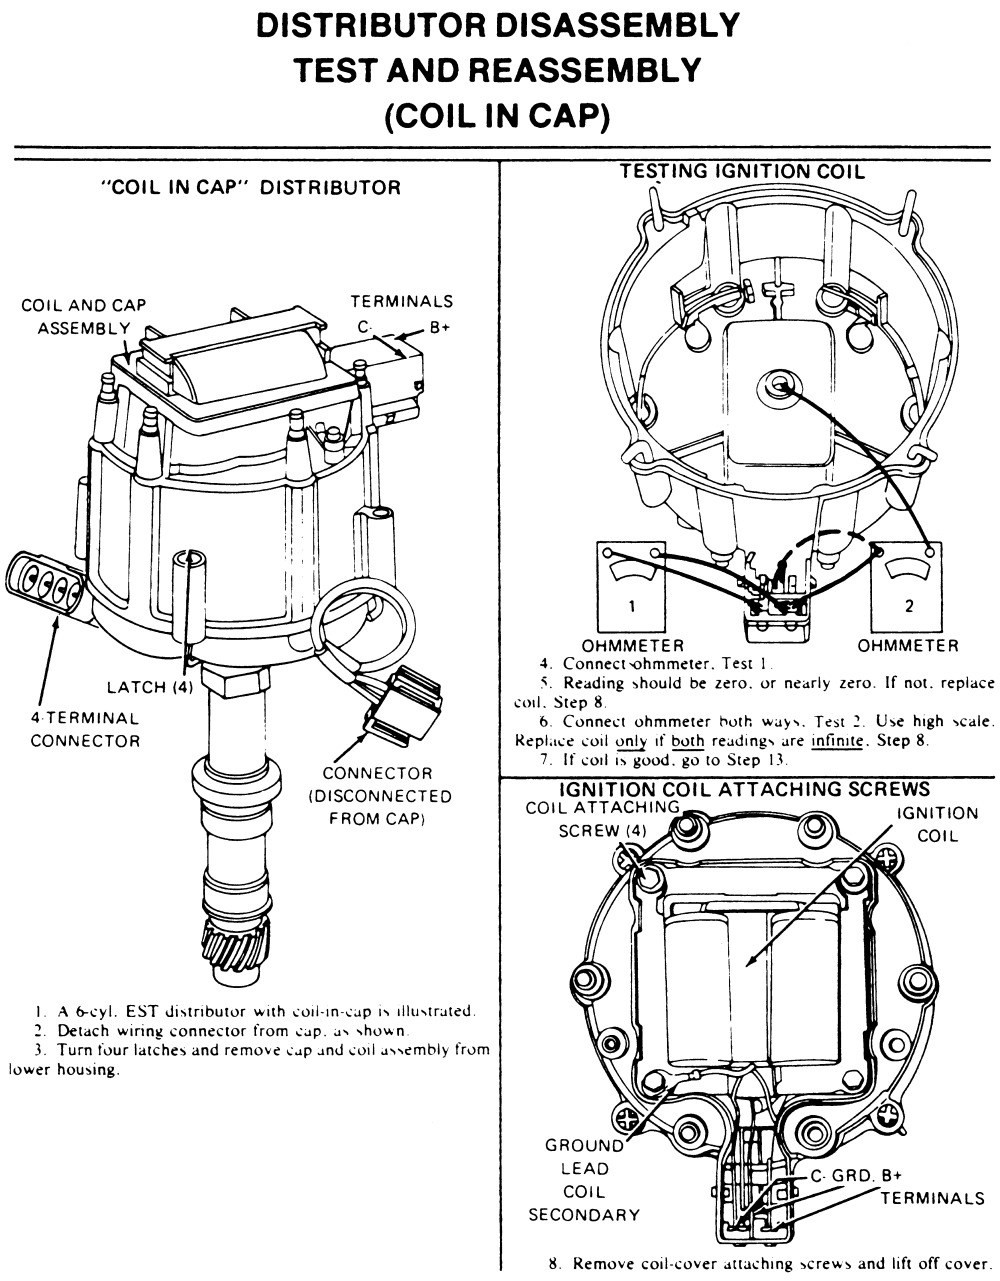 Wiring Diagram Chevy 350 Distributor Cap Hei Thoughtexpansion Net To